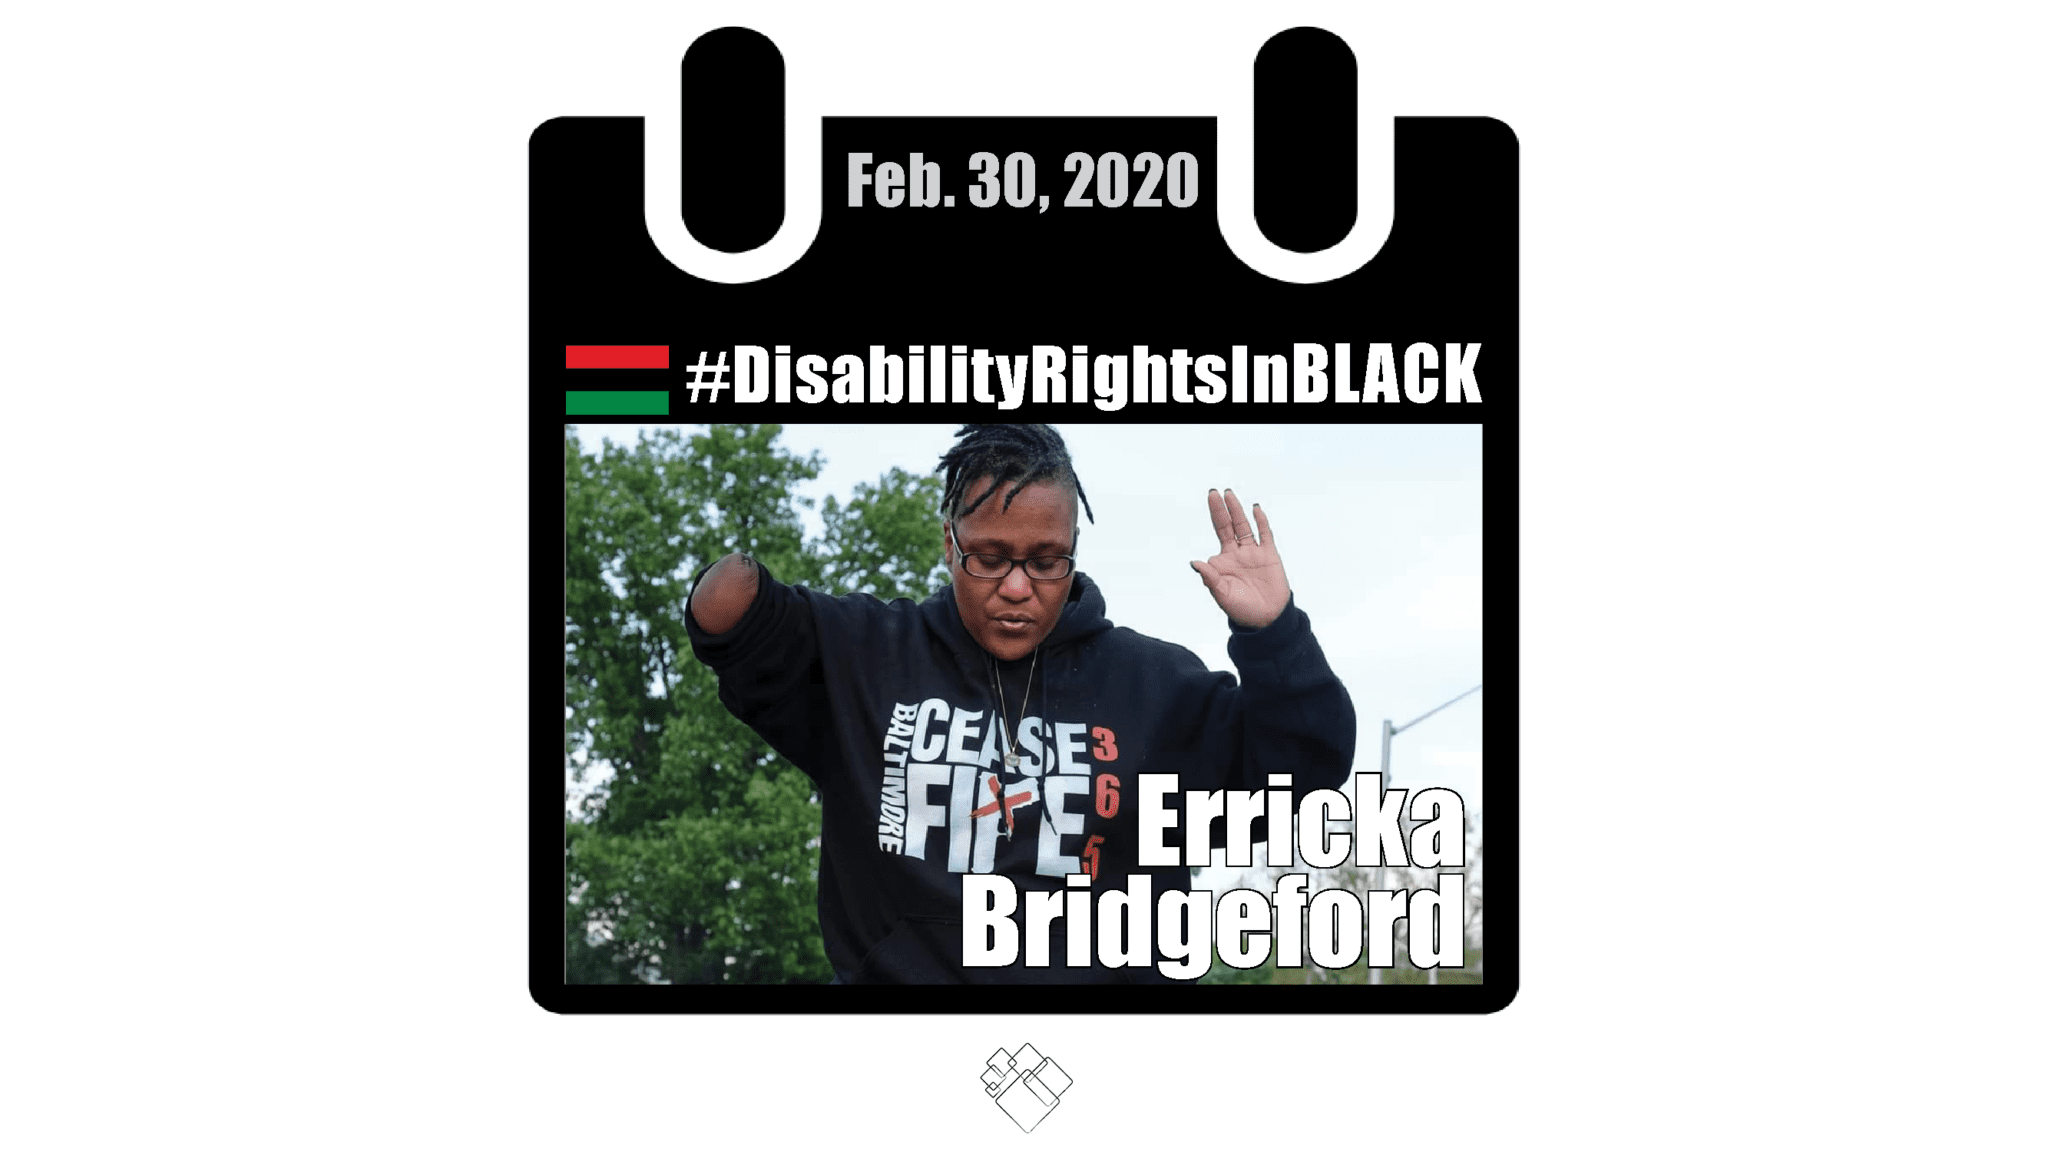 Errika kneels on the ground with both arms up wearing a black hoodie that reads Baltimore Ceasefire 365. The image of her has the Disability Rights in Black calendar style frame graphic with the hashtag for the series at the top and the date, February 29, 2020.